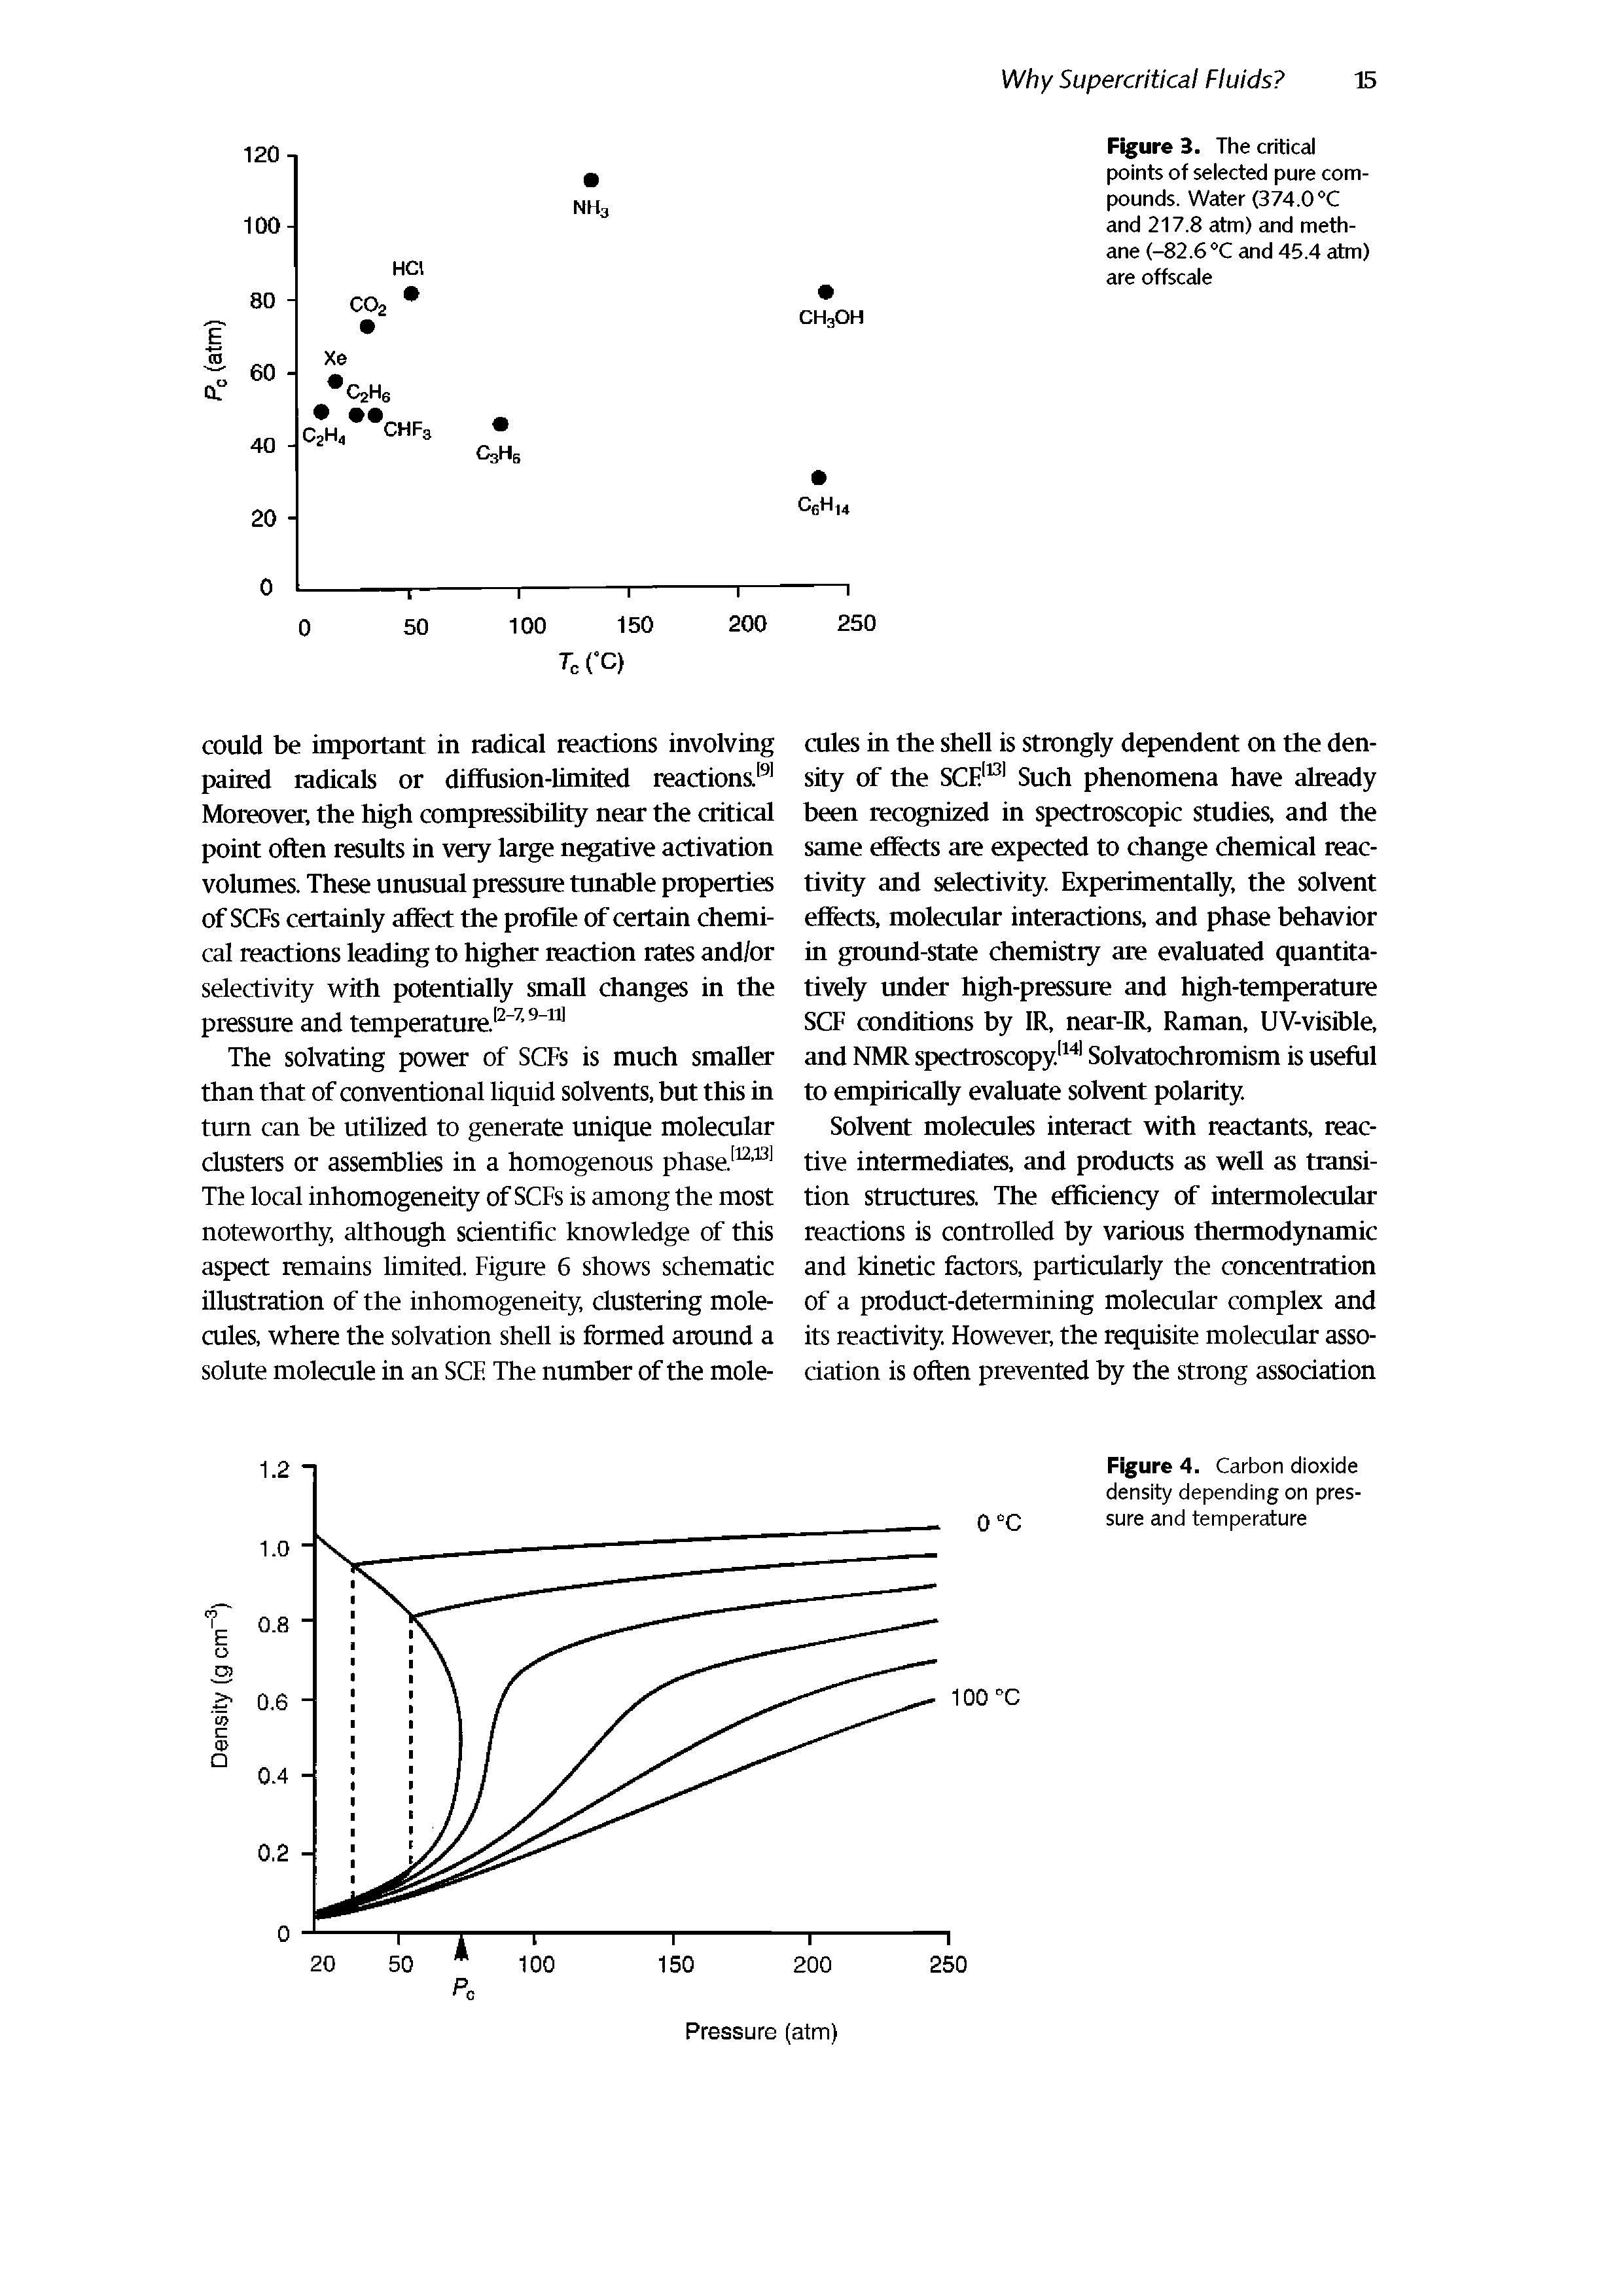 Figure 3. The critical points of selected pure compounds. Water (374.0 °C and 217.8 atm) and methane (-82.6 °C and 45.4 atm) are offscale...